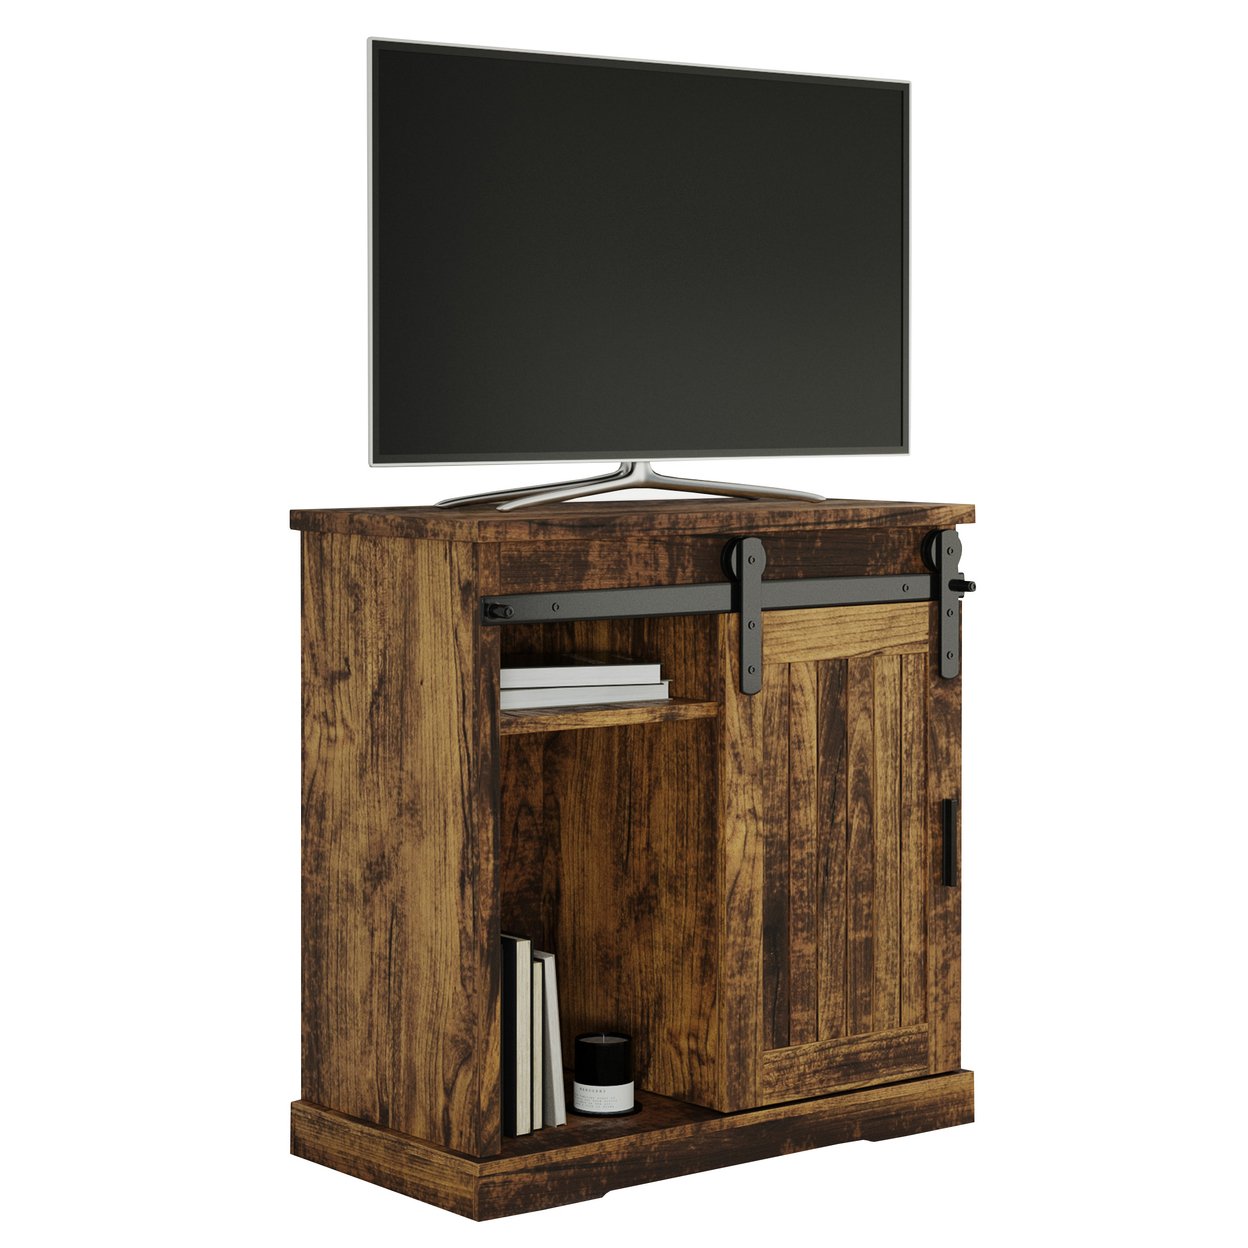 Tall TV Stand Entertainment Center For Up To 34-in TVs, Brown Woodgrain